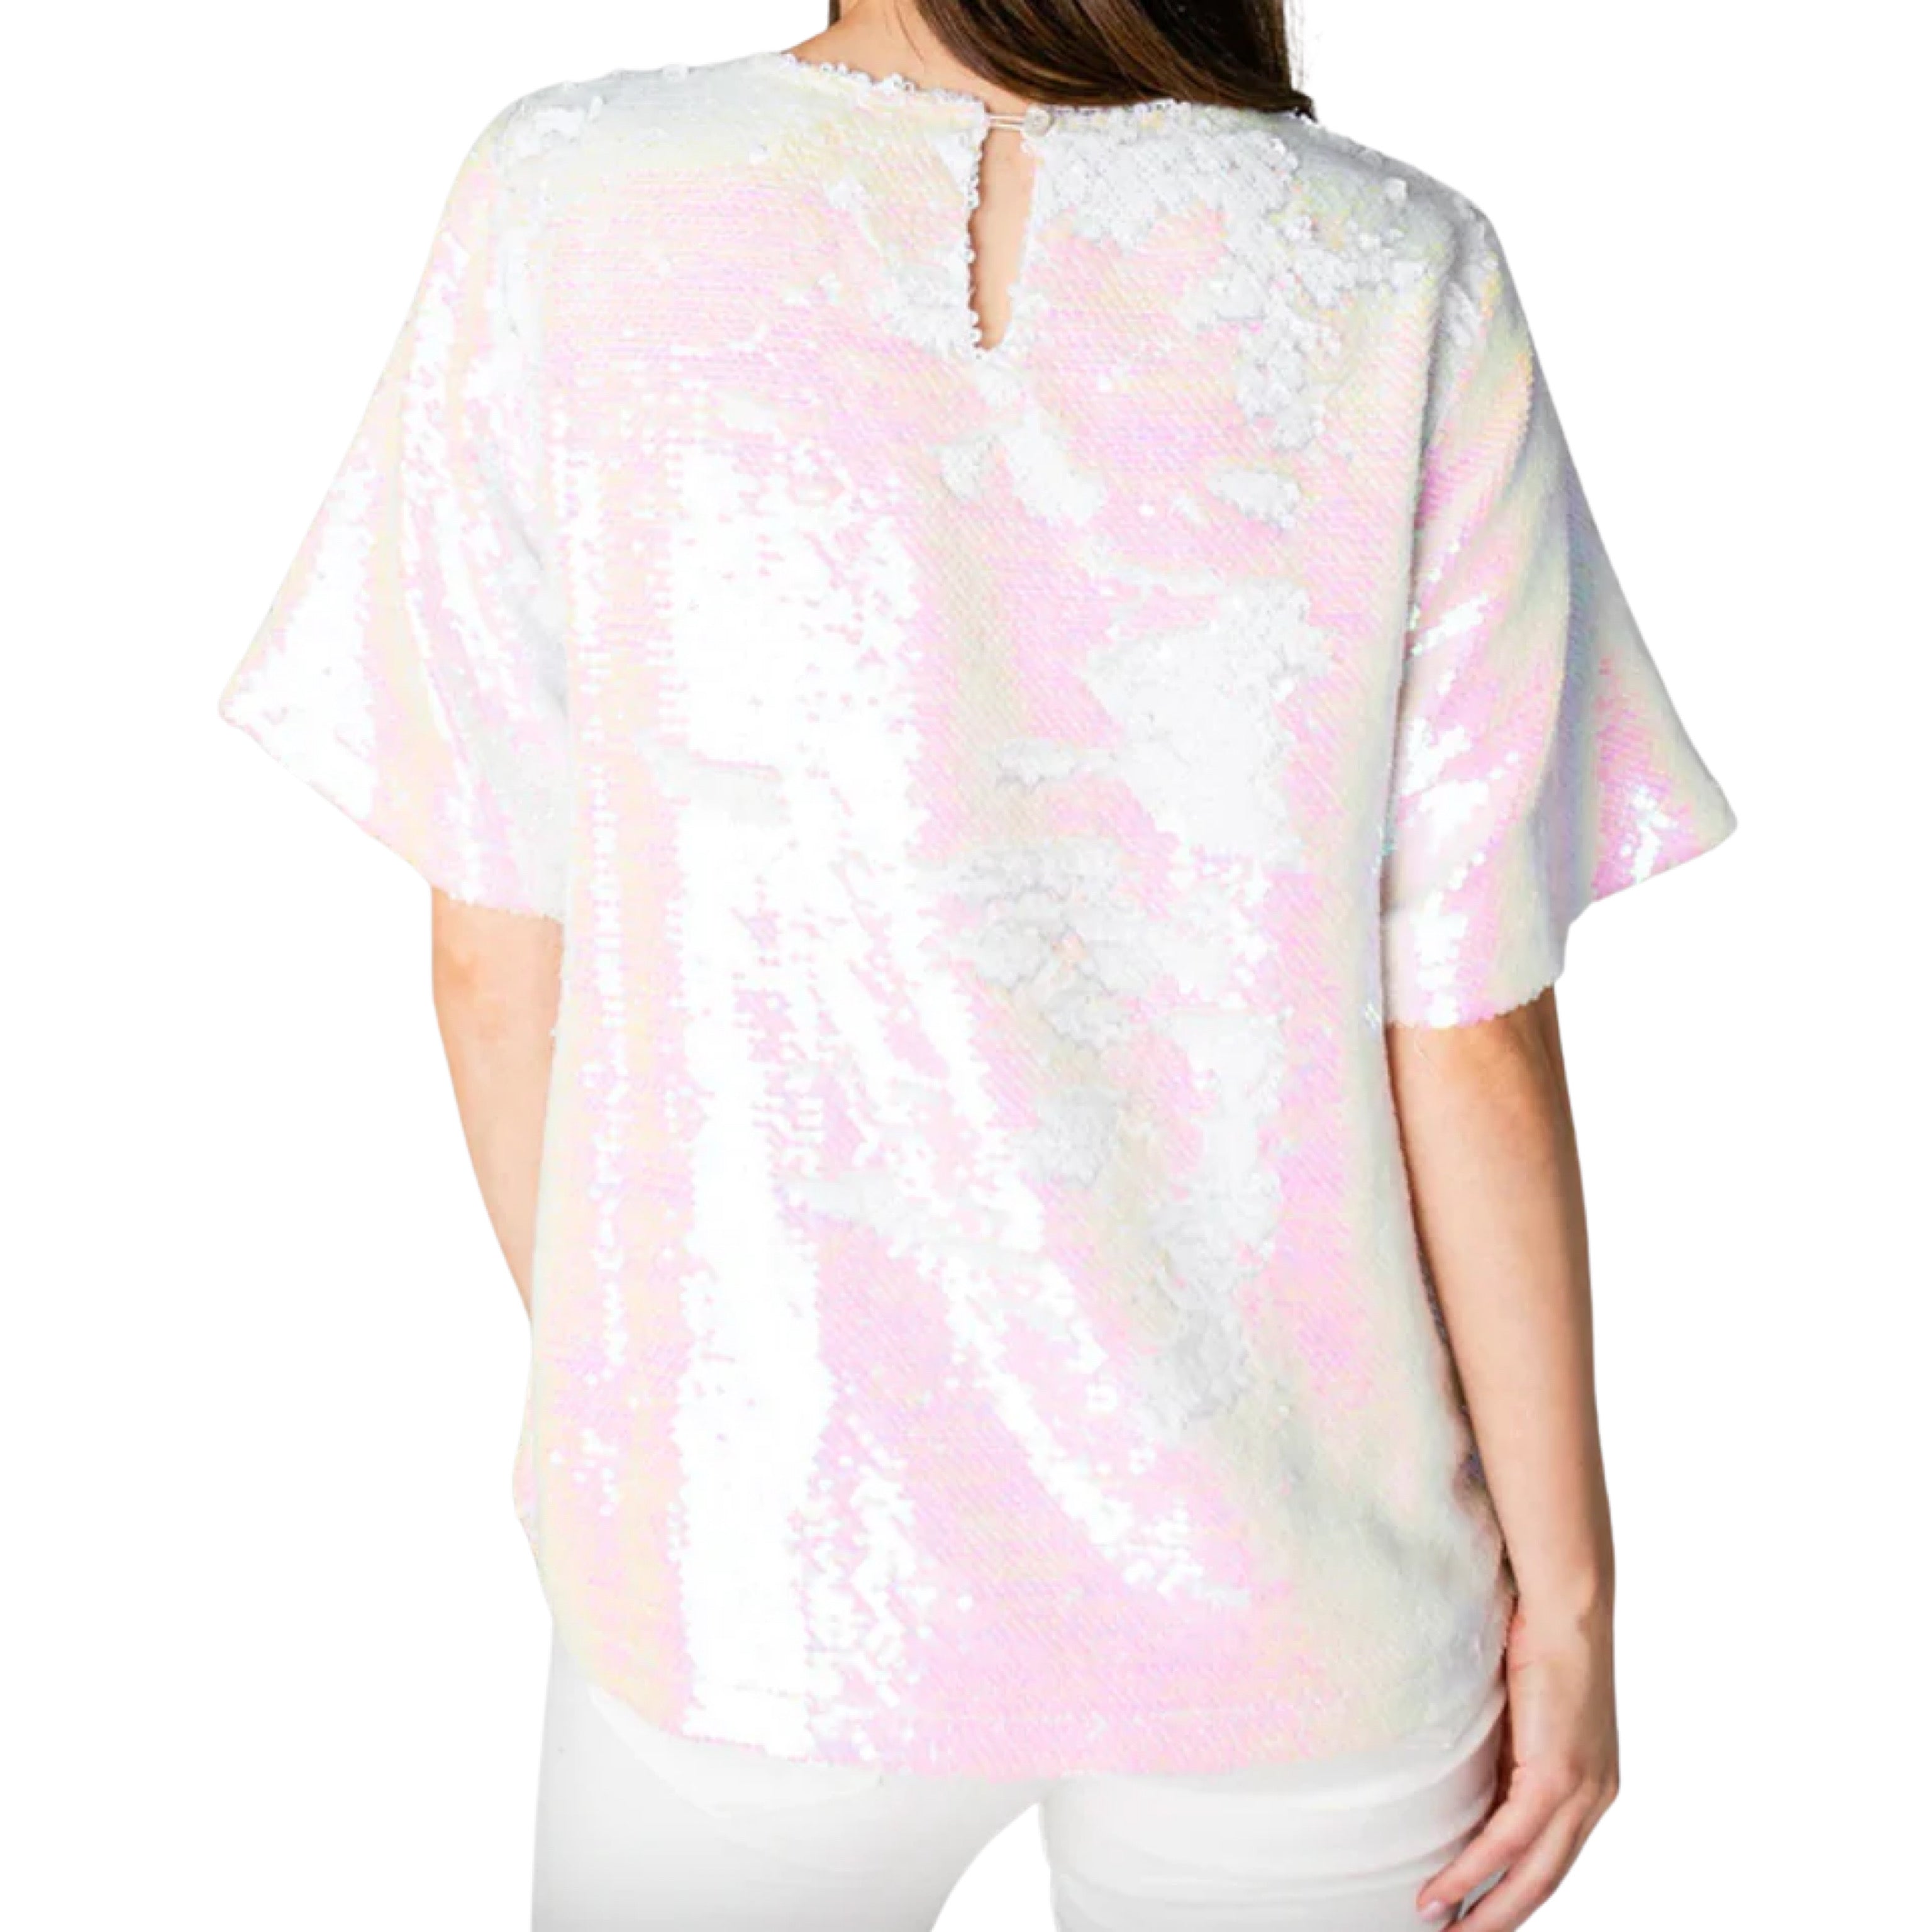 Buddy Love iridescent sequin blouse, size S